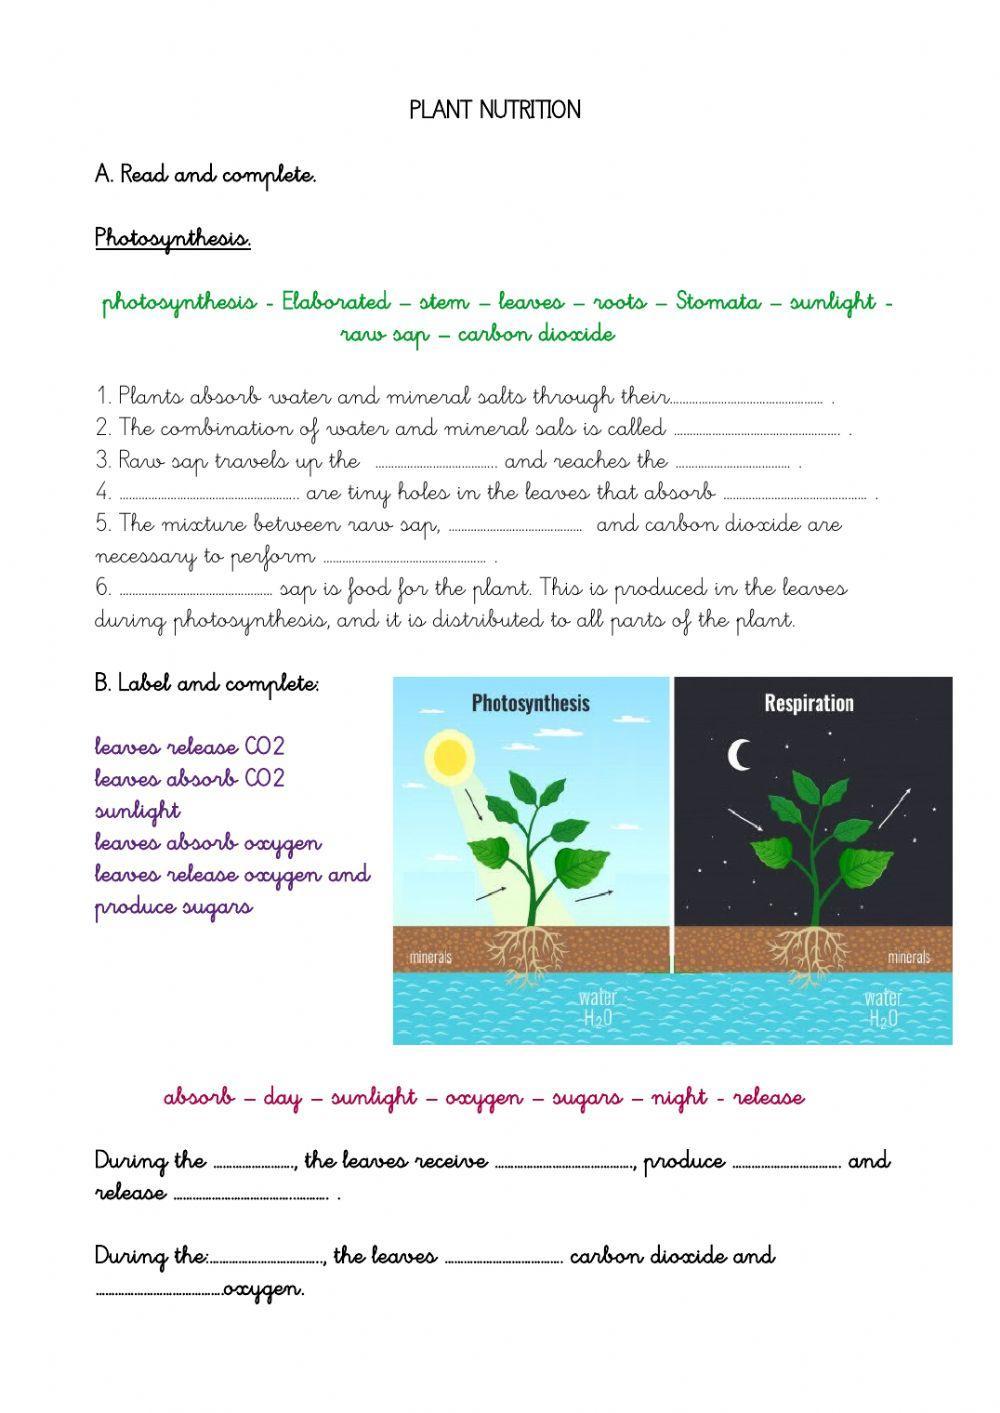 Plant nutrition and respiration